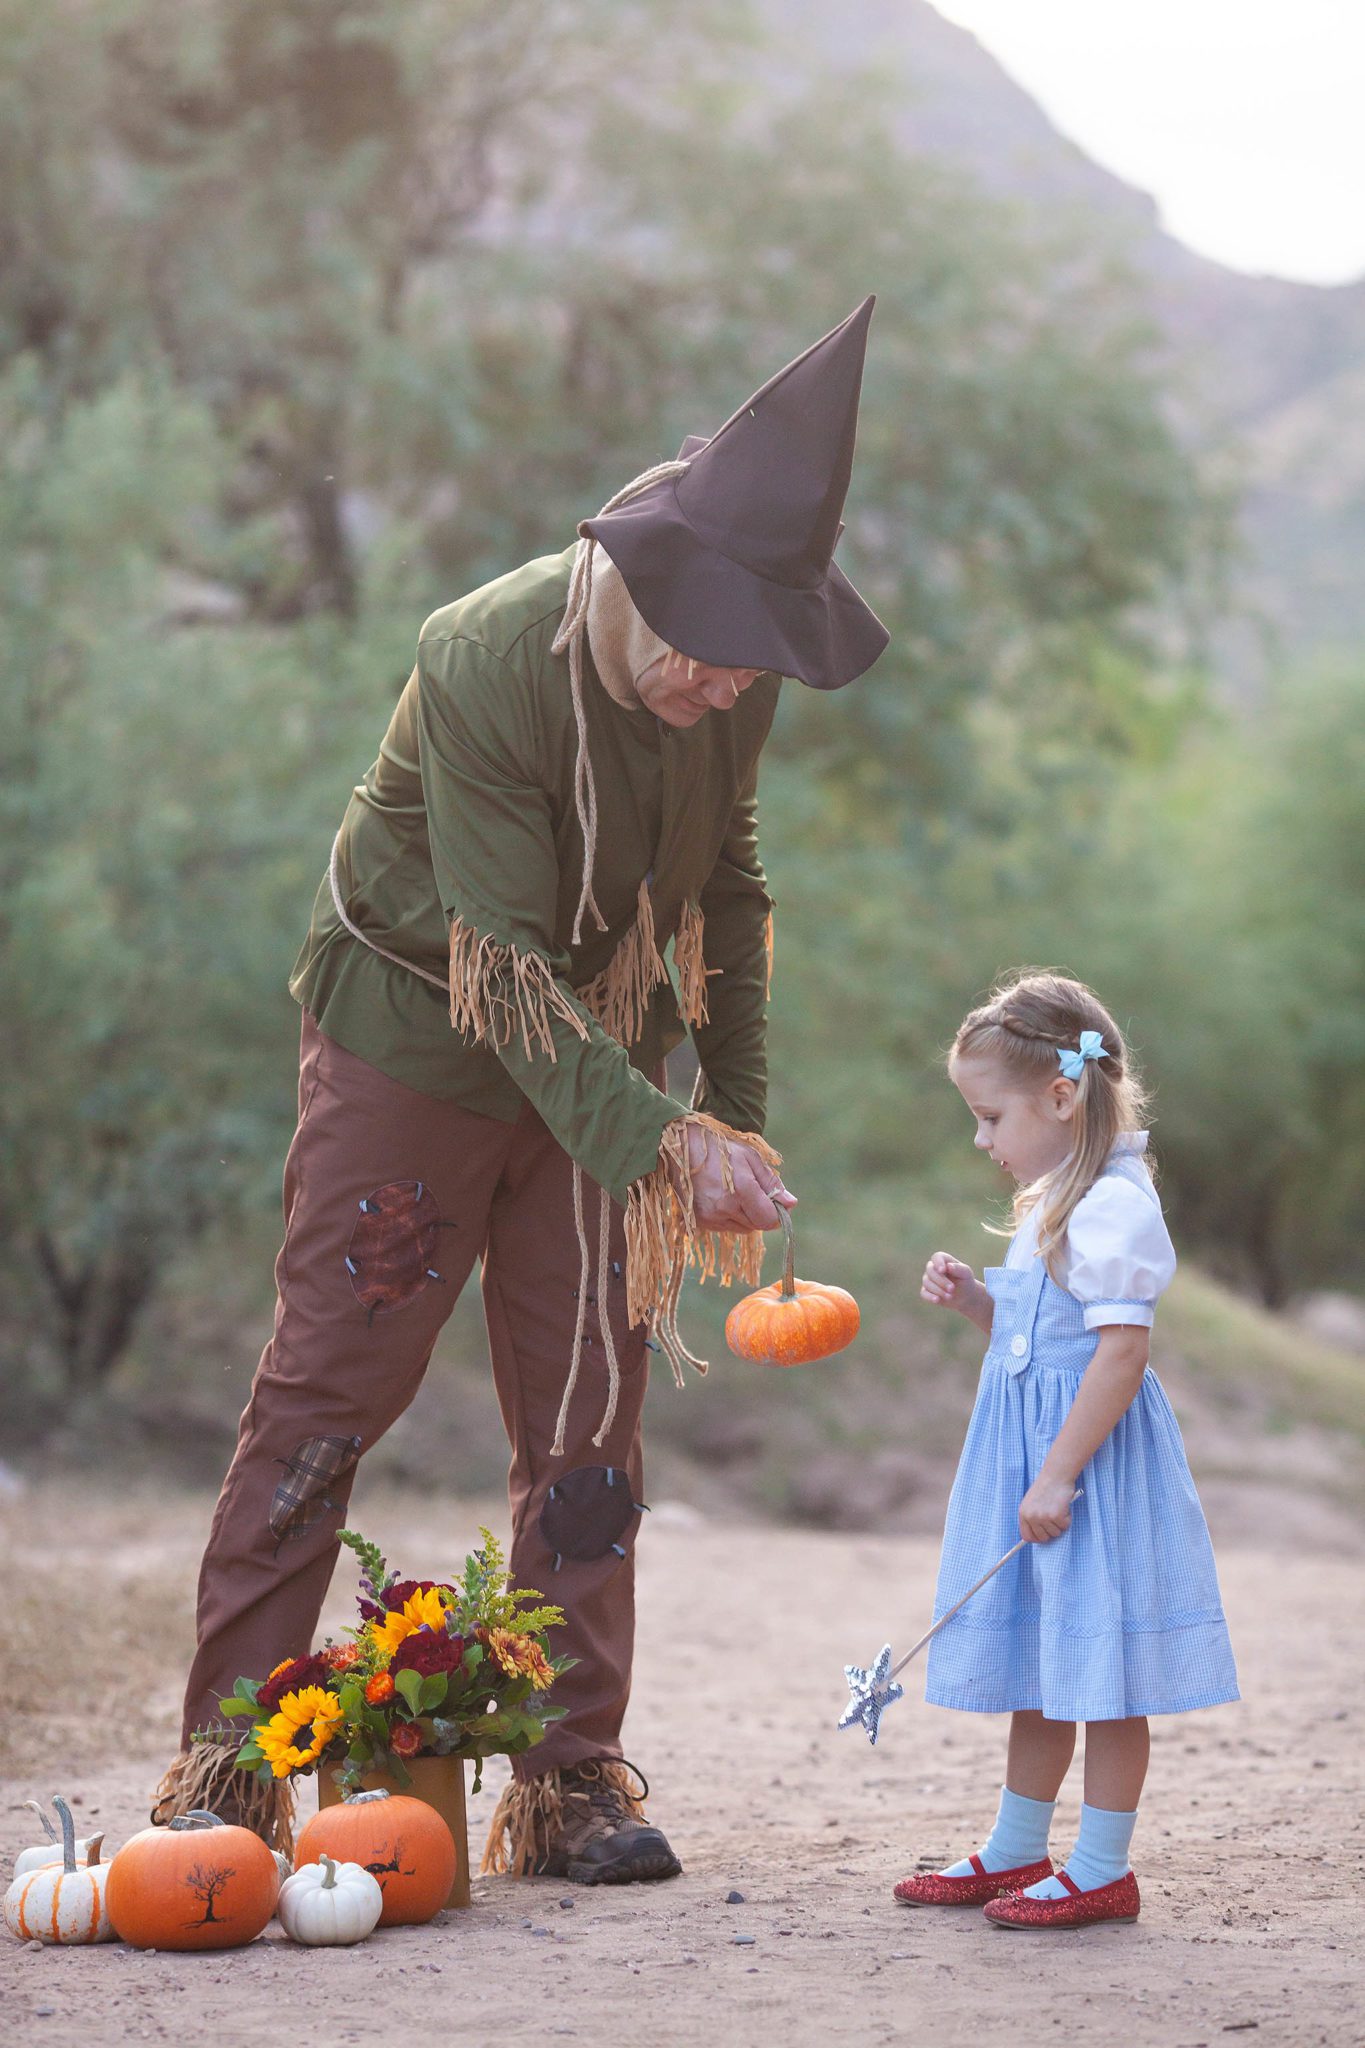 Wizard of Oz Themed Family Photo Session